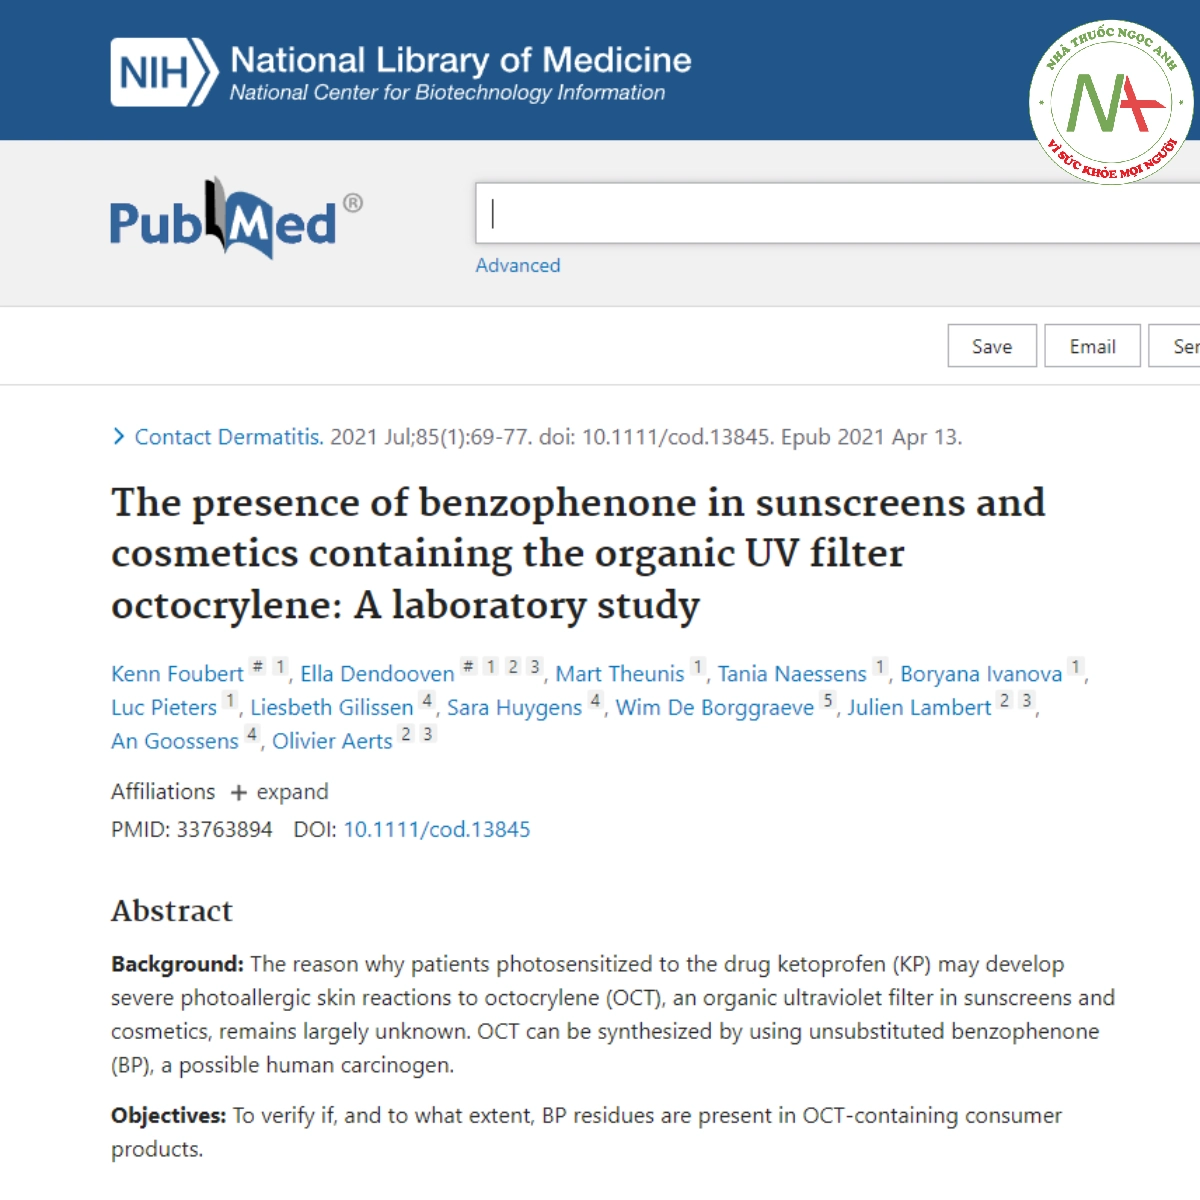 The presence of benzophenone in sunscreens and cosmetics containing the organic UV filter octocrylene_ A laboratory study